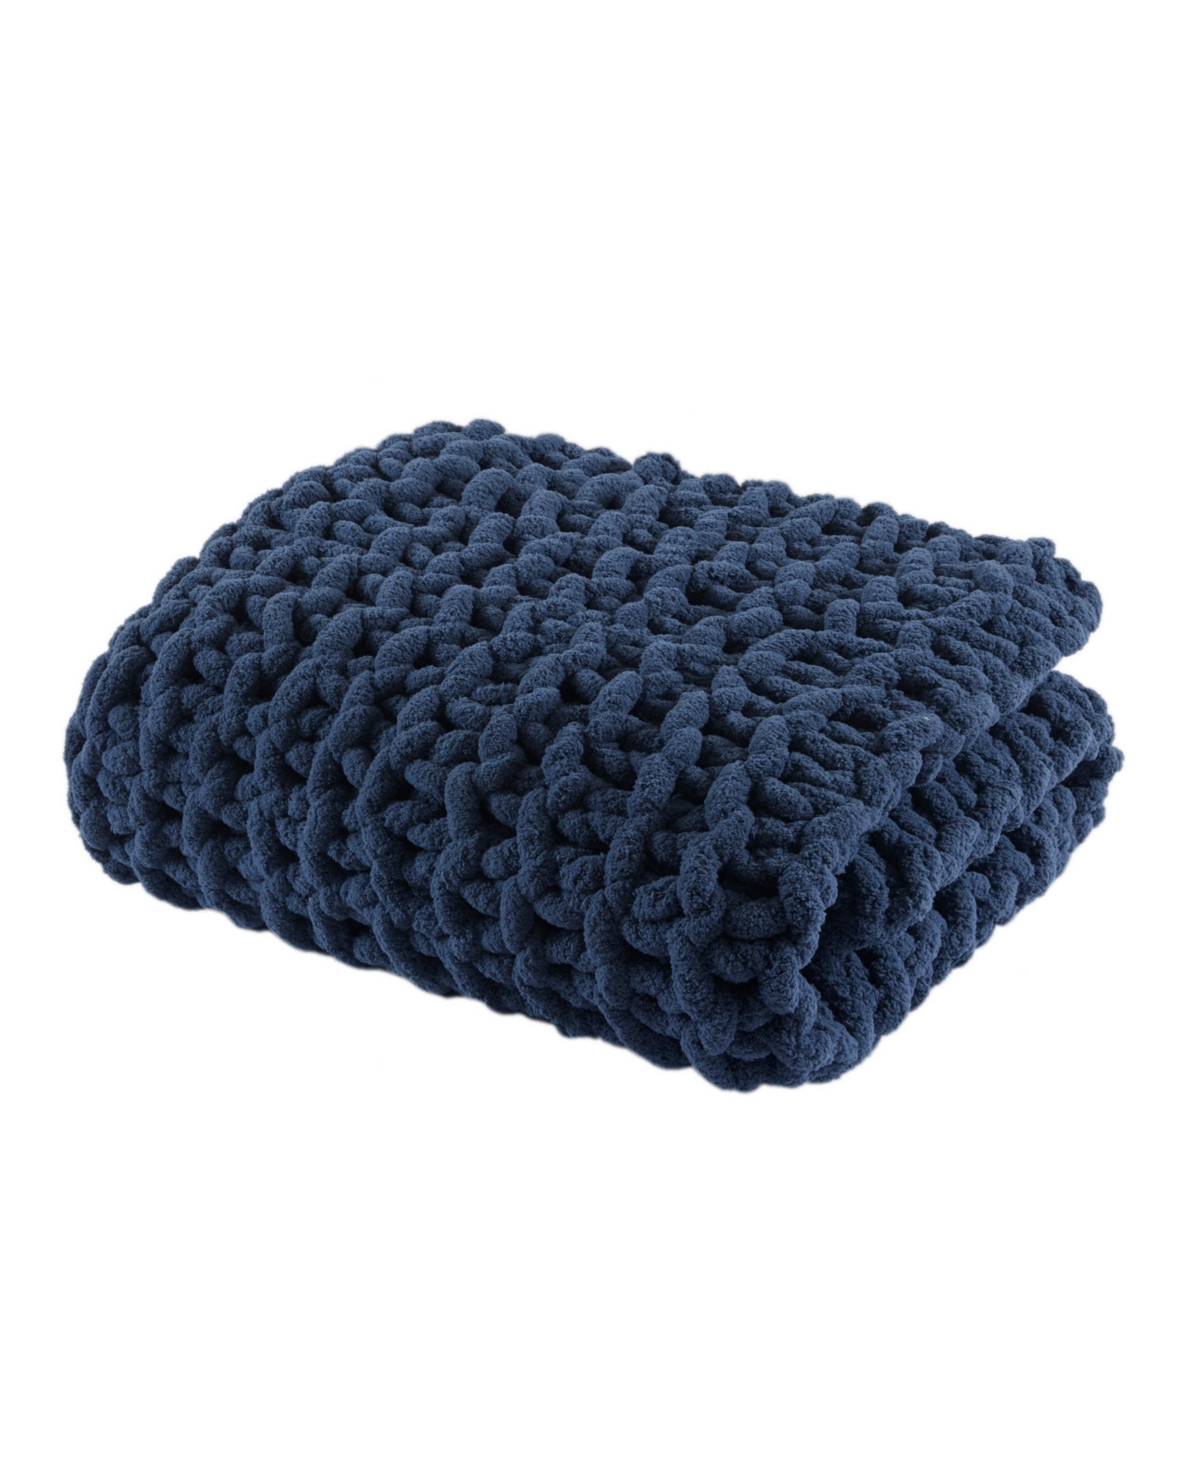 Madison Park Chunky-knit Chenille Throw, 50" X 60" In Navy Blue